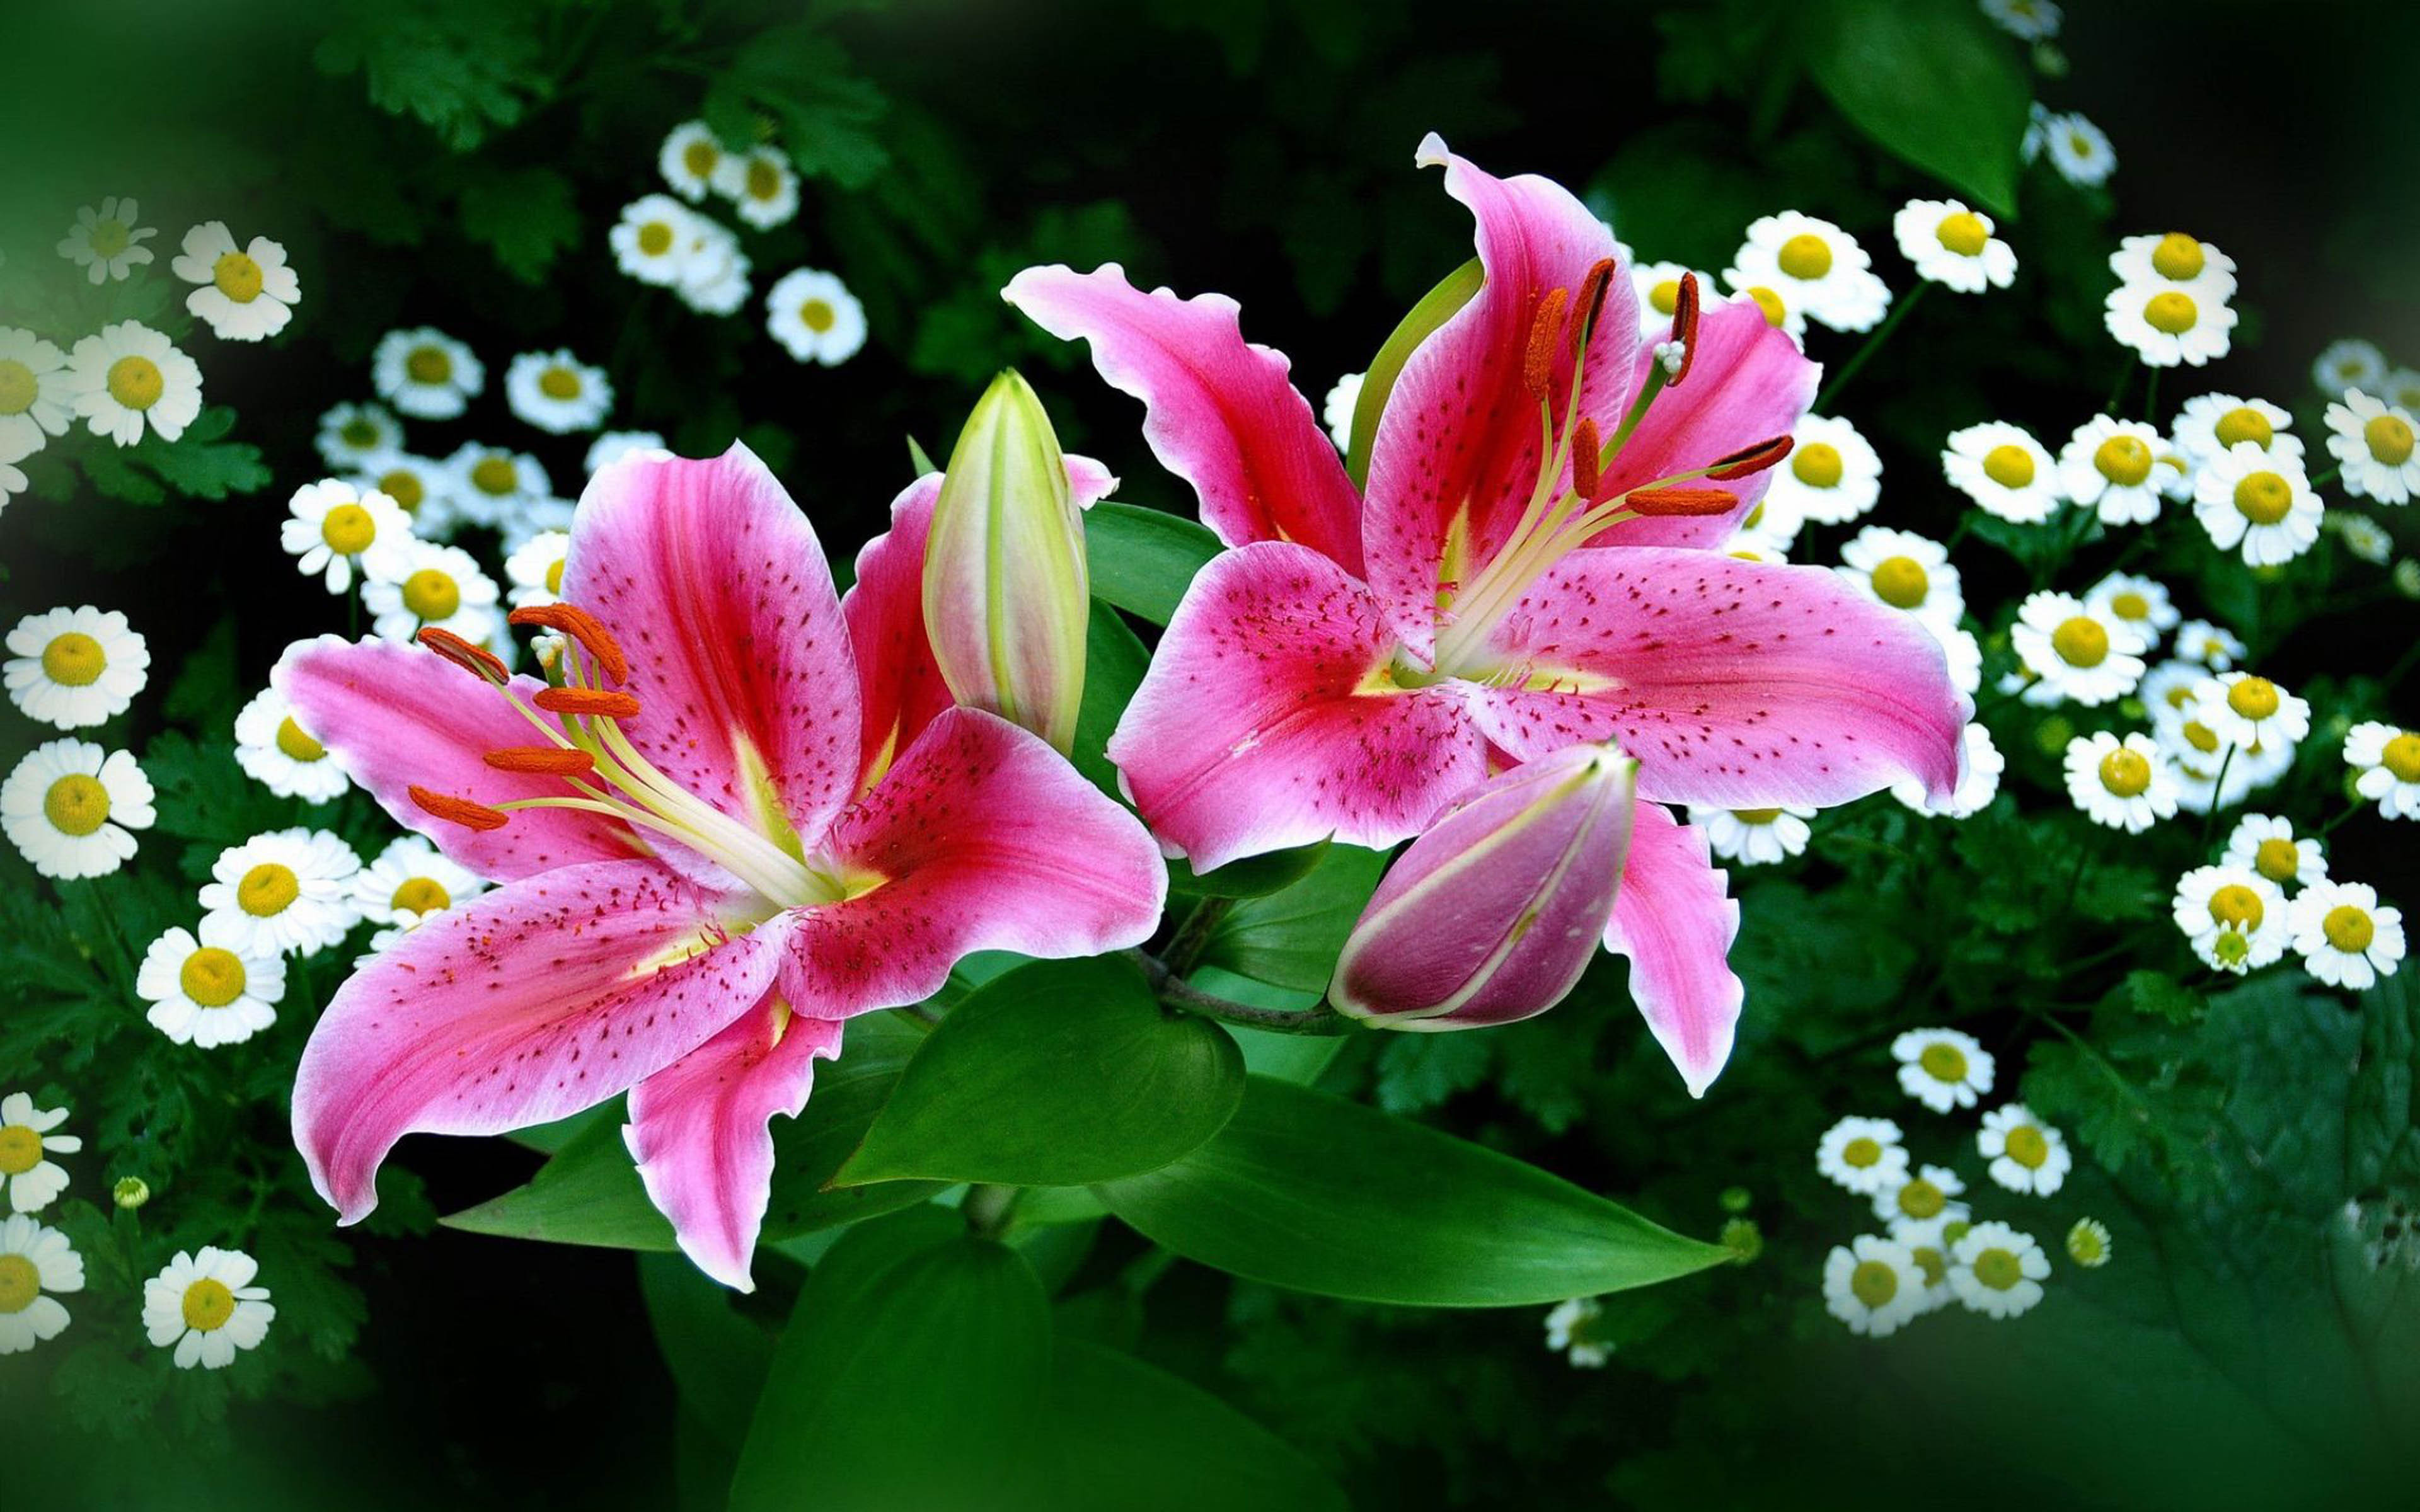 Lilies Tiger Lily Flowers Lily Garden Desktop Wallpapers 